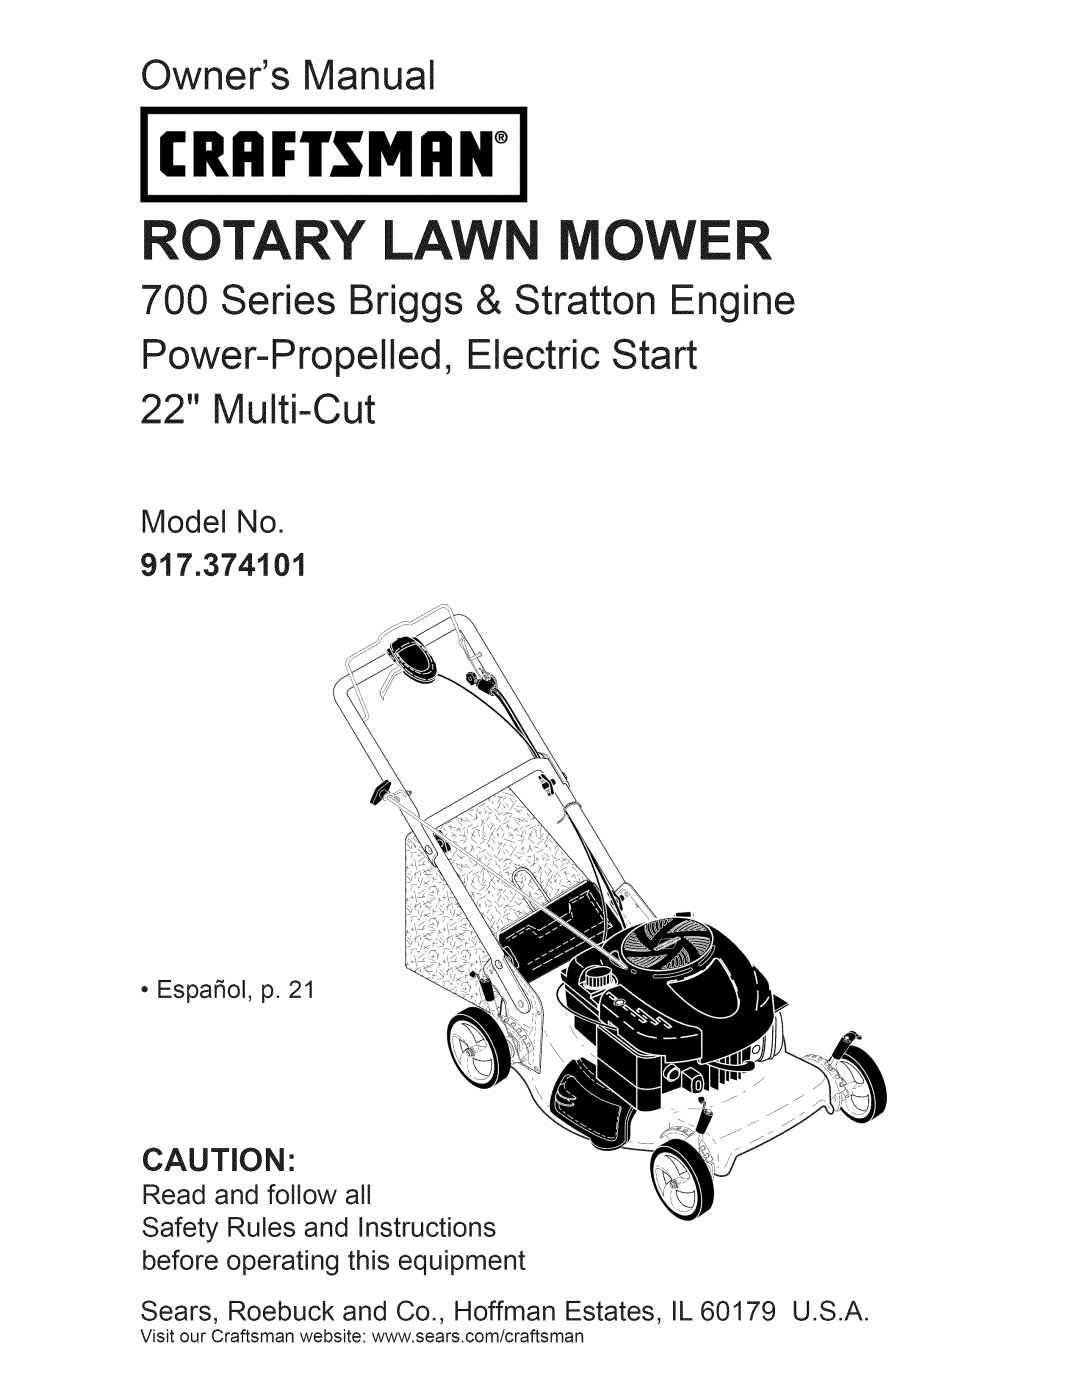 Craftsman manual Model No 917.374101, Craftsman, Rotary Lawn Mower, Owners Manual, Series Briggs & Stratton Engine 